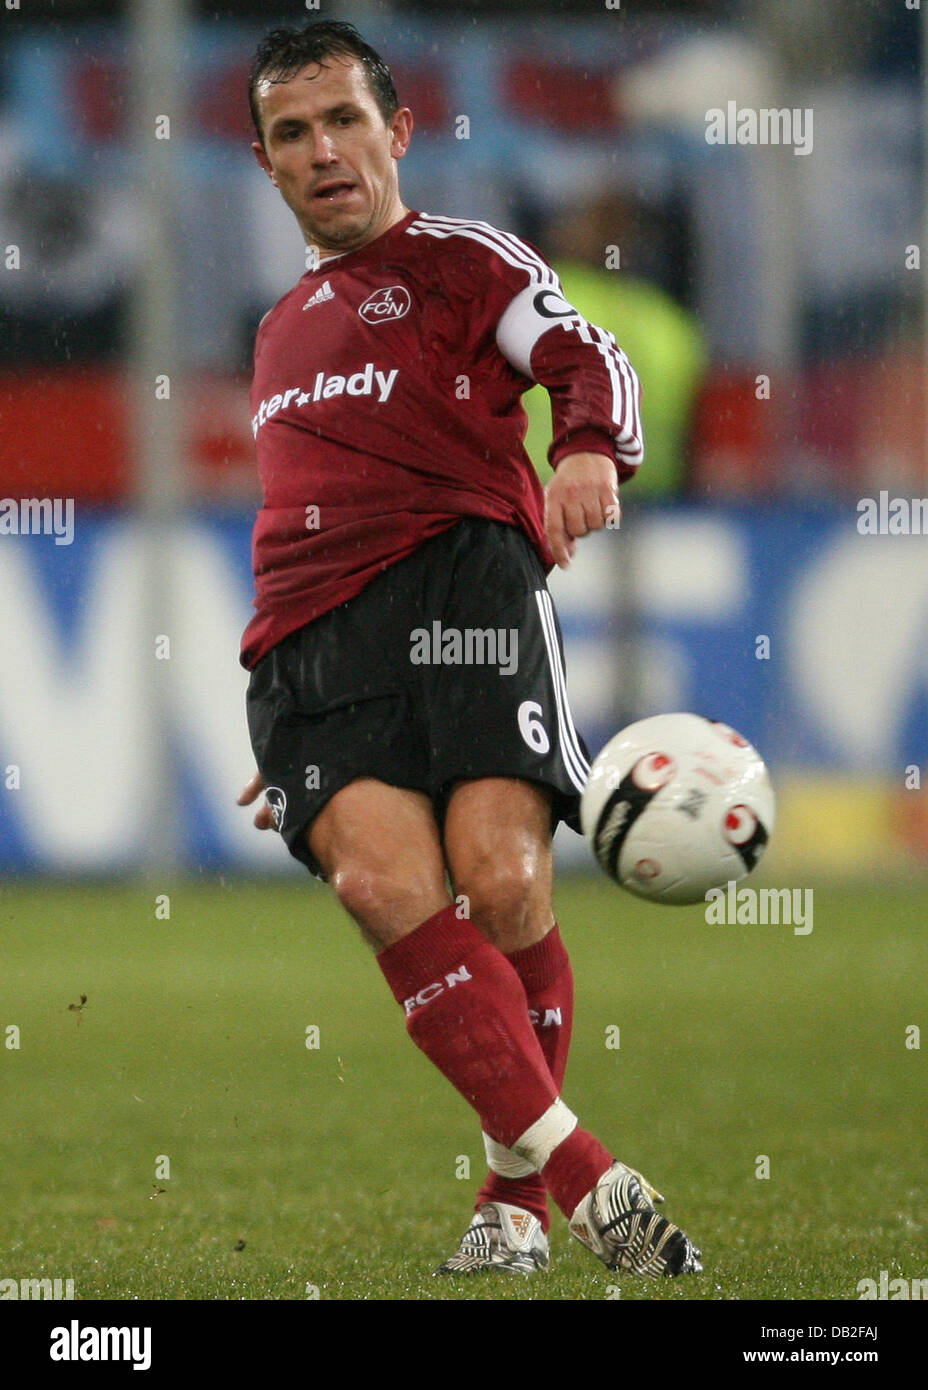 Roque Junior of Duisburg is on the ball during the Bundesliga match MSV  Duisburg v 1.FC Nuremberg at MSV Arena stadium of Duisburg, Germany, 02  December 2007. Diosburg won the match 1-0.